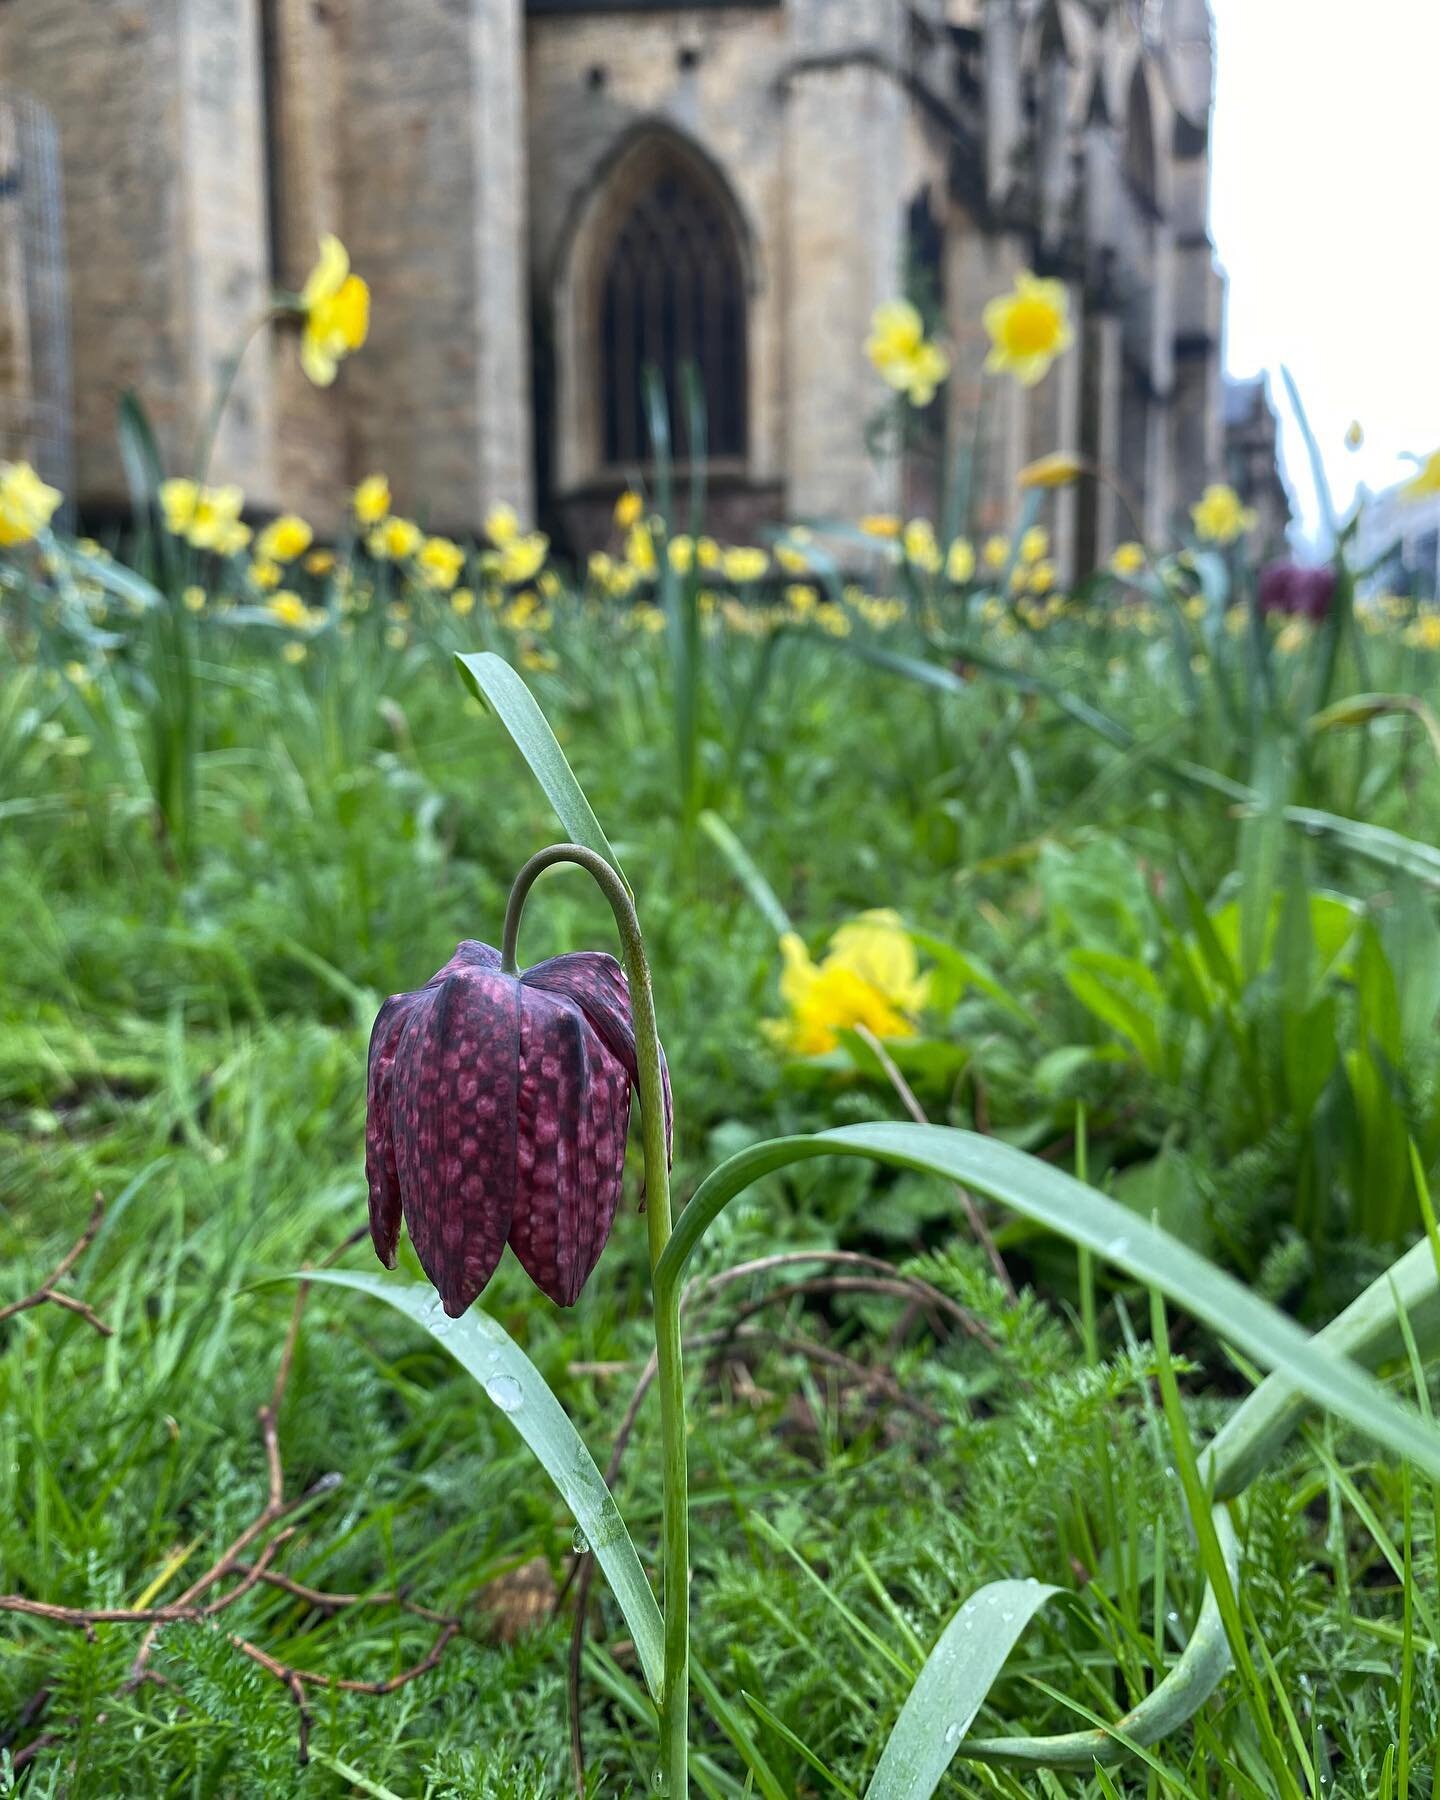 🌸 Spring is finally here! And it's the perfect time to get outside and enjoy the blooming spring flowers. Speaking of which, have you heard about the snakeshead fritillaries? These beauties are must-see UK wildflowers this time of year! So I was ver